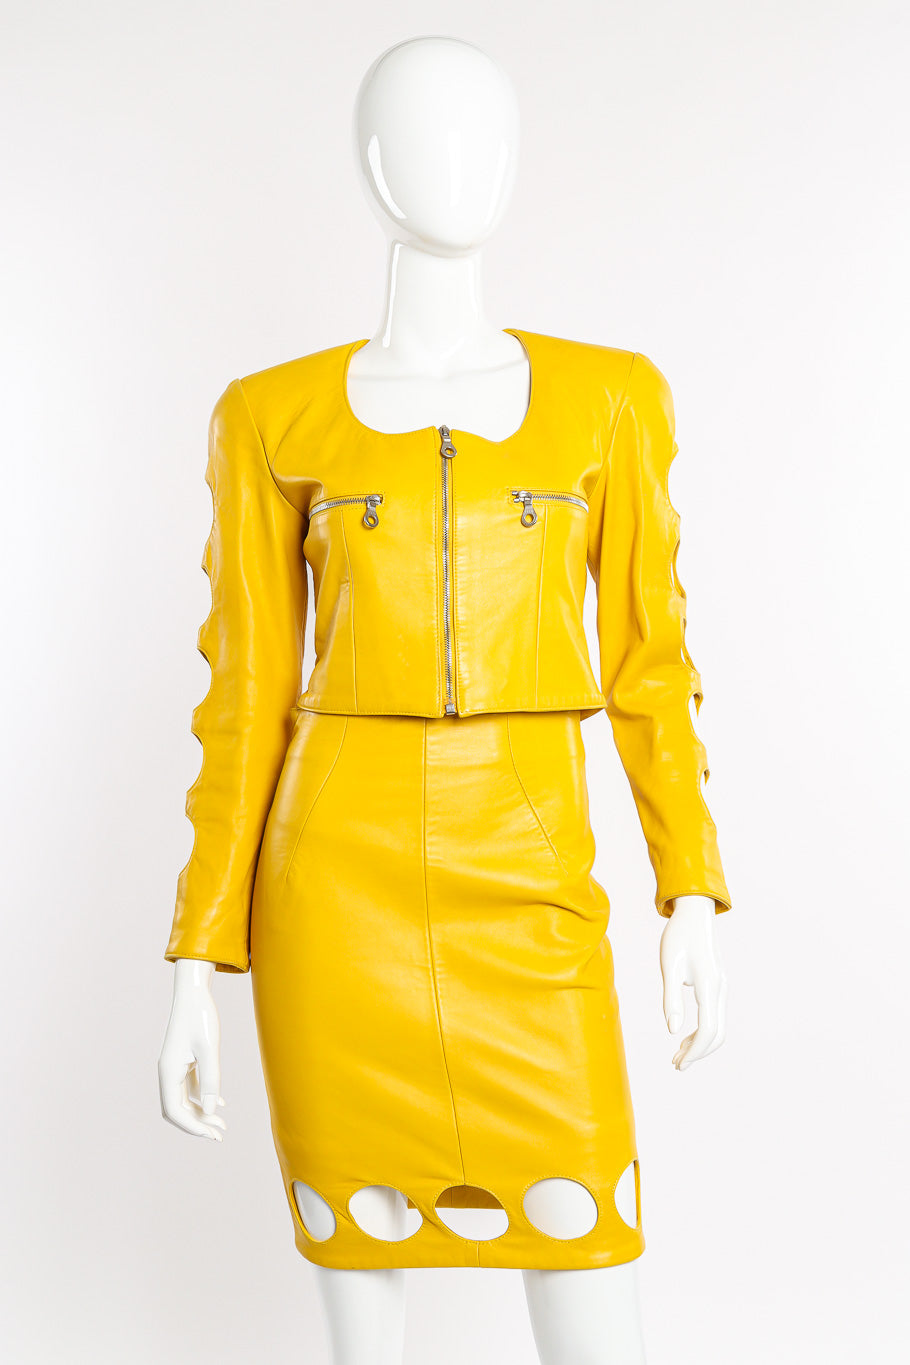 Vintage North Beach Cutout Leather Jacket and Skirt Set front view on mannequin @Recessla